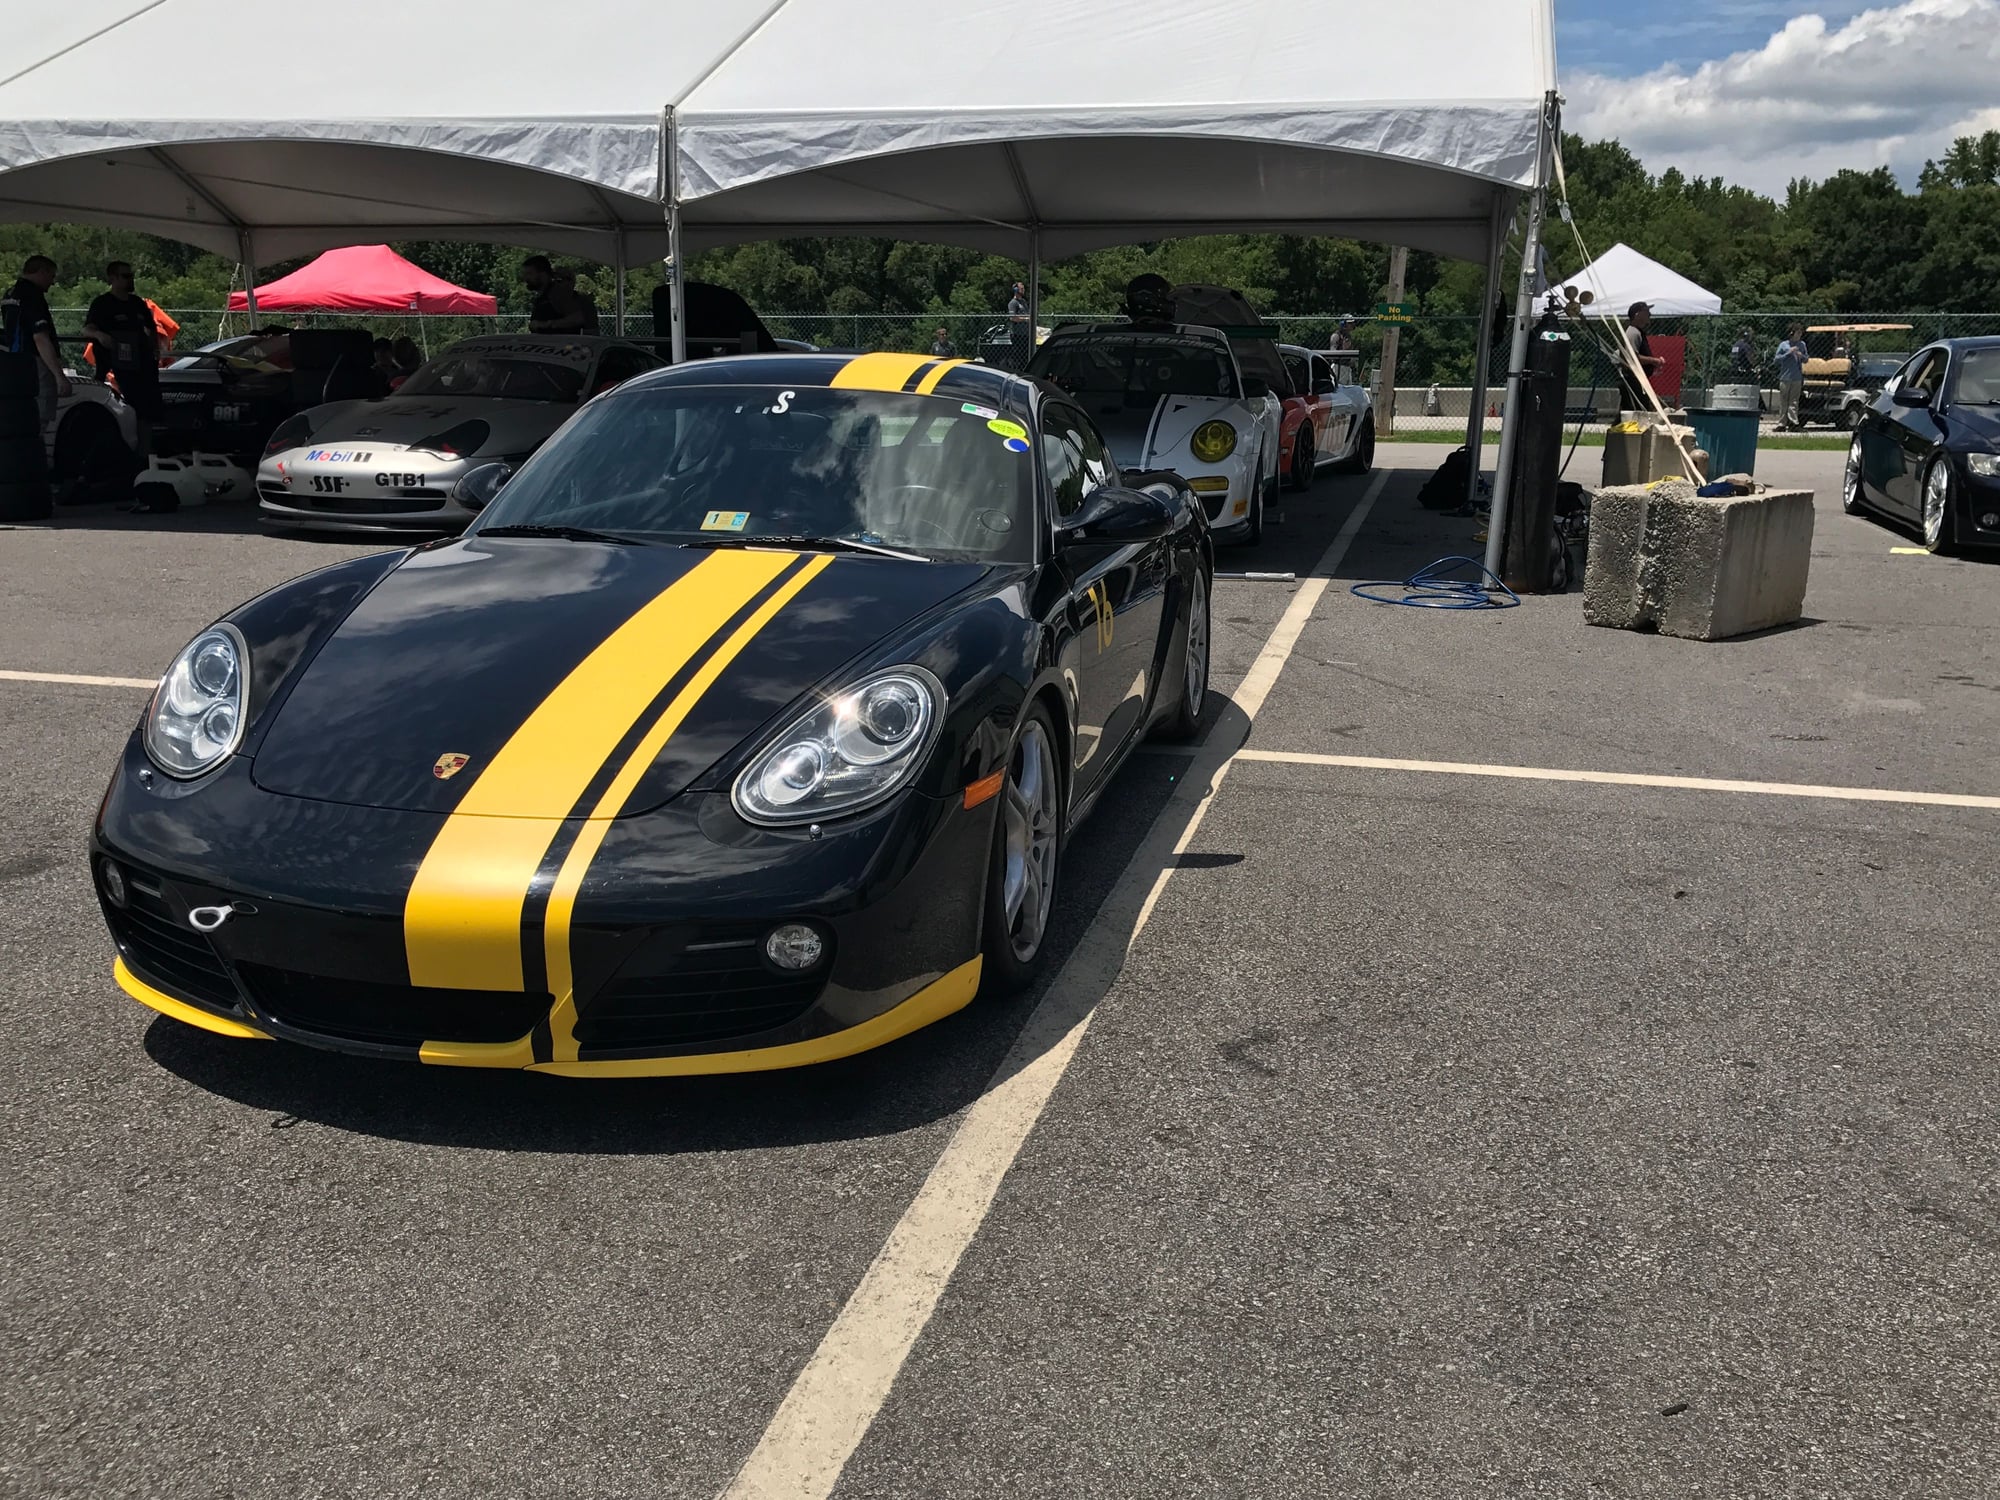 2010 Porsche Cayman -  - Used - VIN WP0AB2A86AU780241 - 26,267 Miles - 6 cyl - 2WD - Manual - Coupe - Black - Baltimore, MD 21231, United States